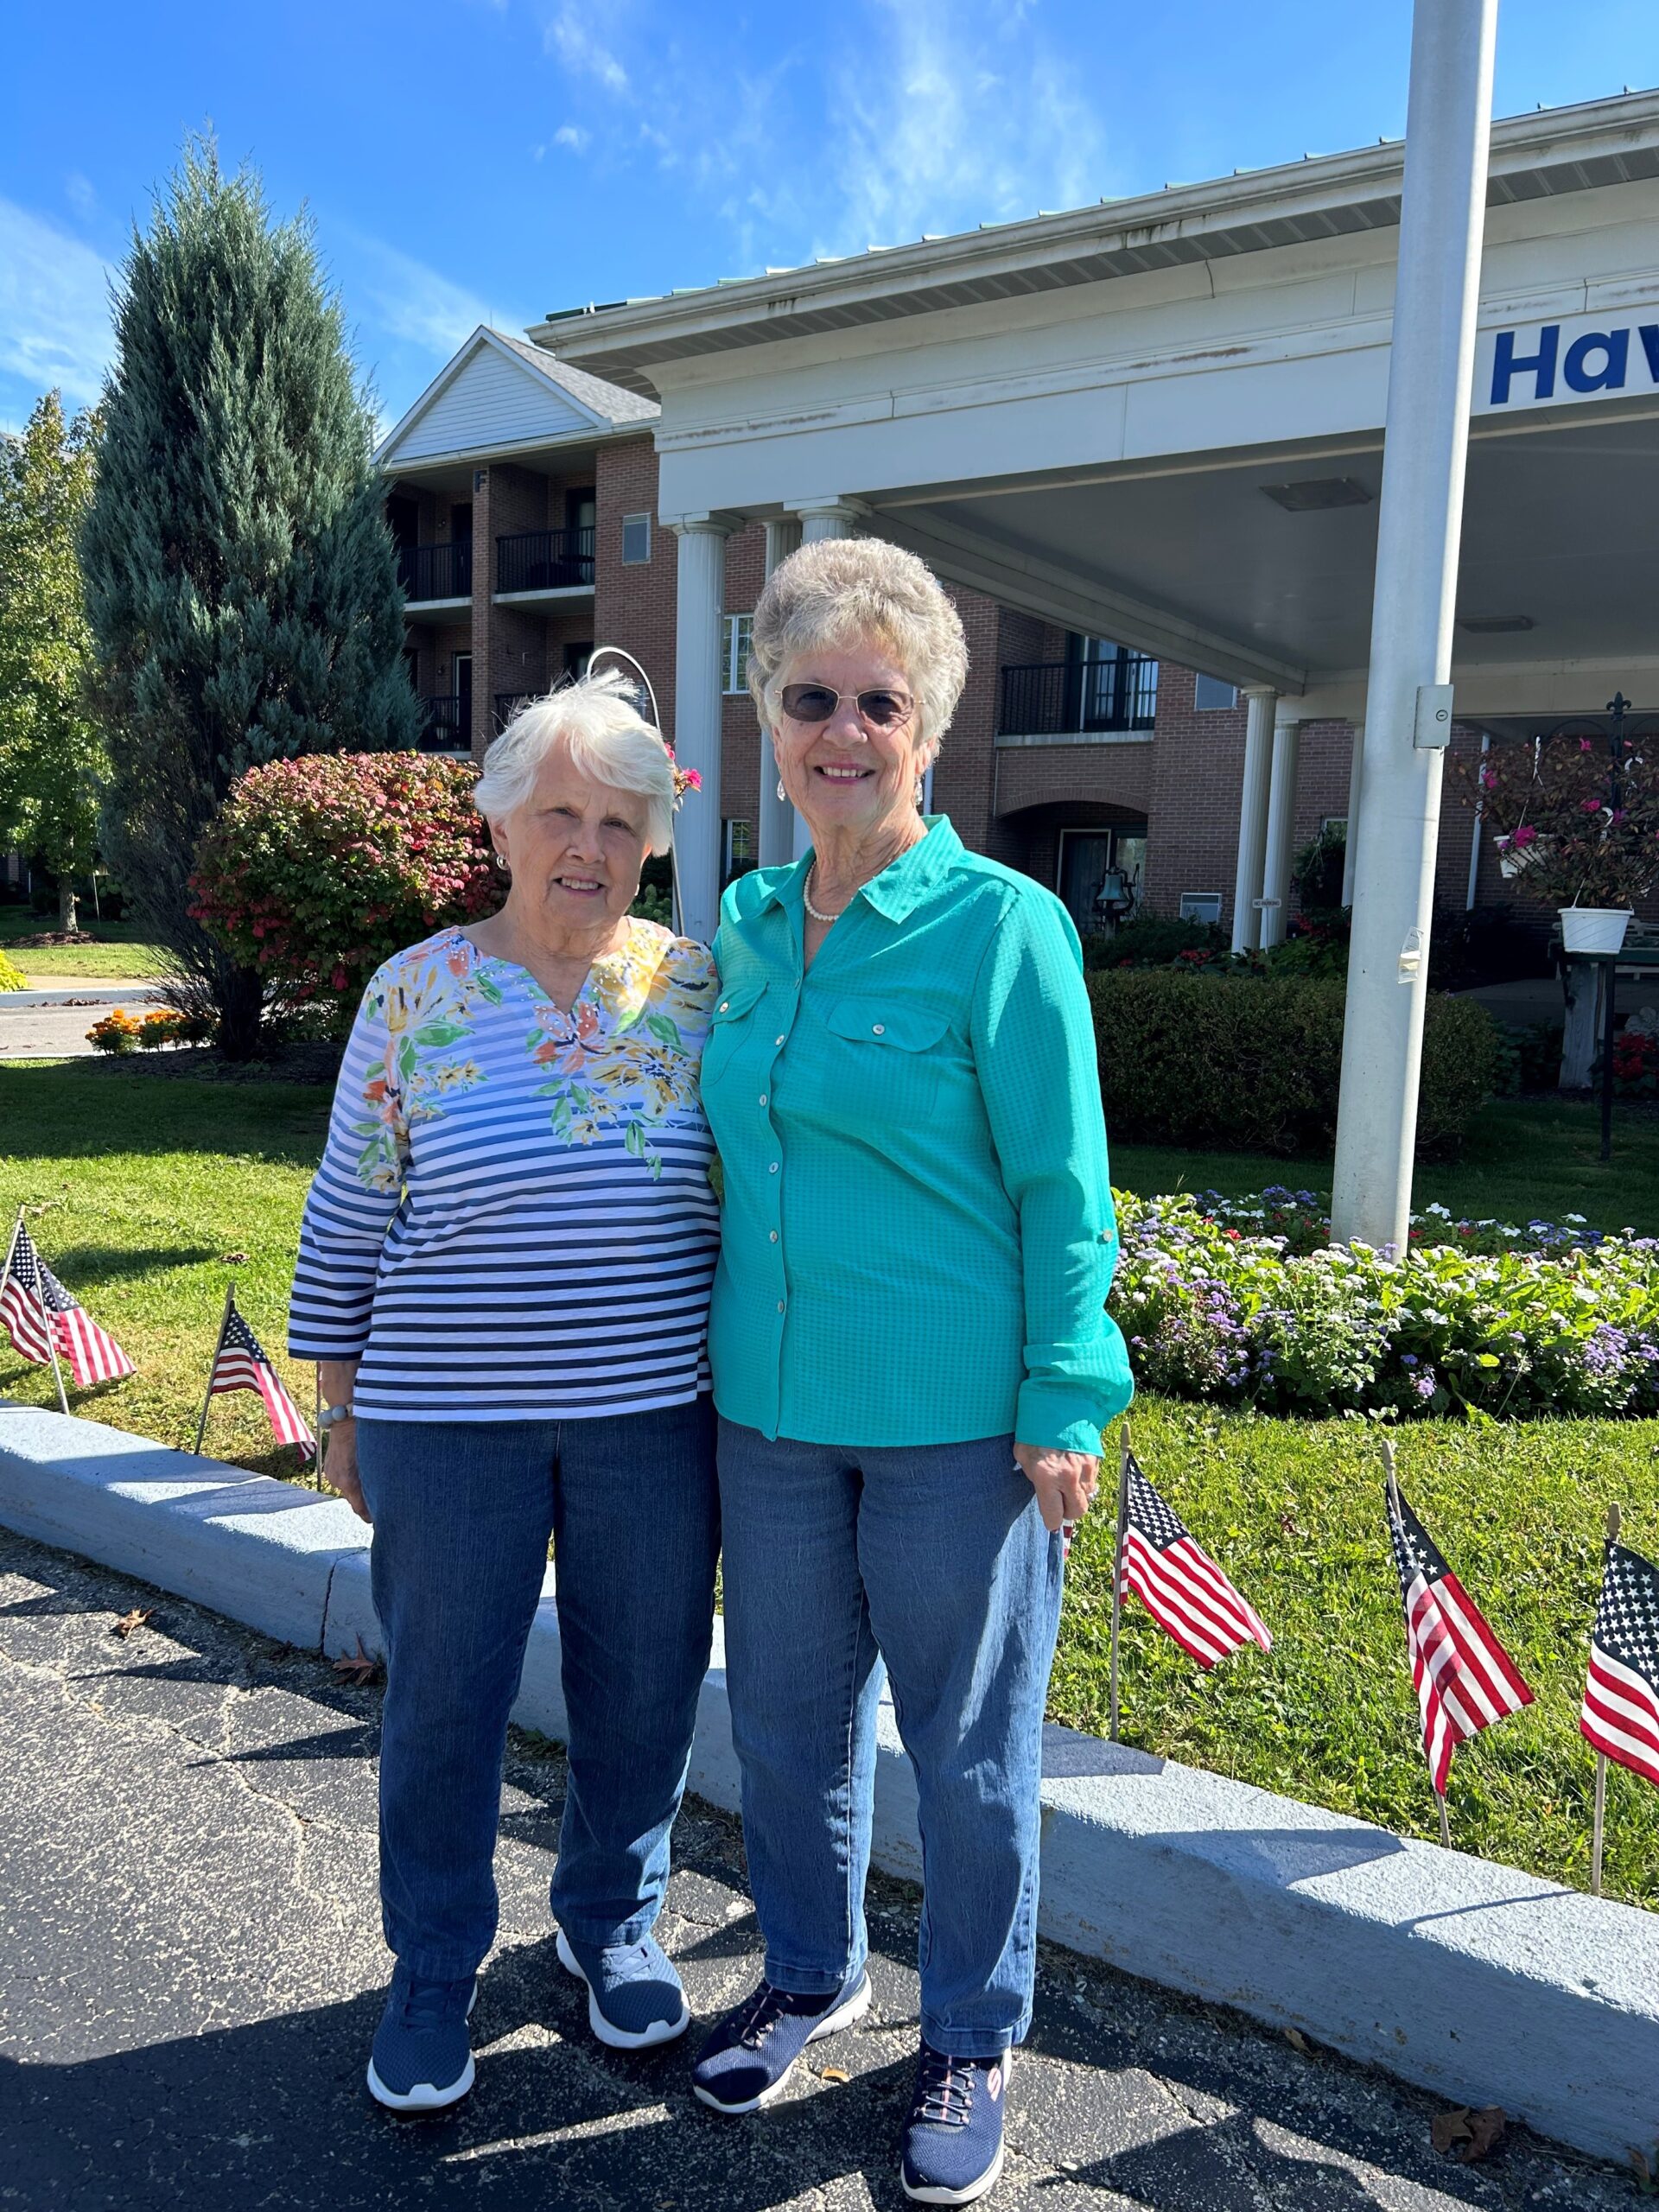 Cabot Haven Apartments residents Pat and Rita